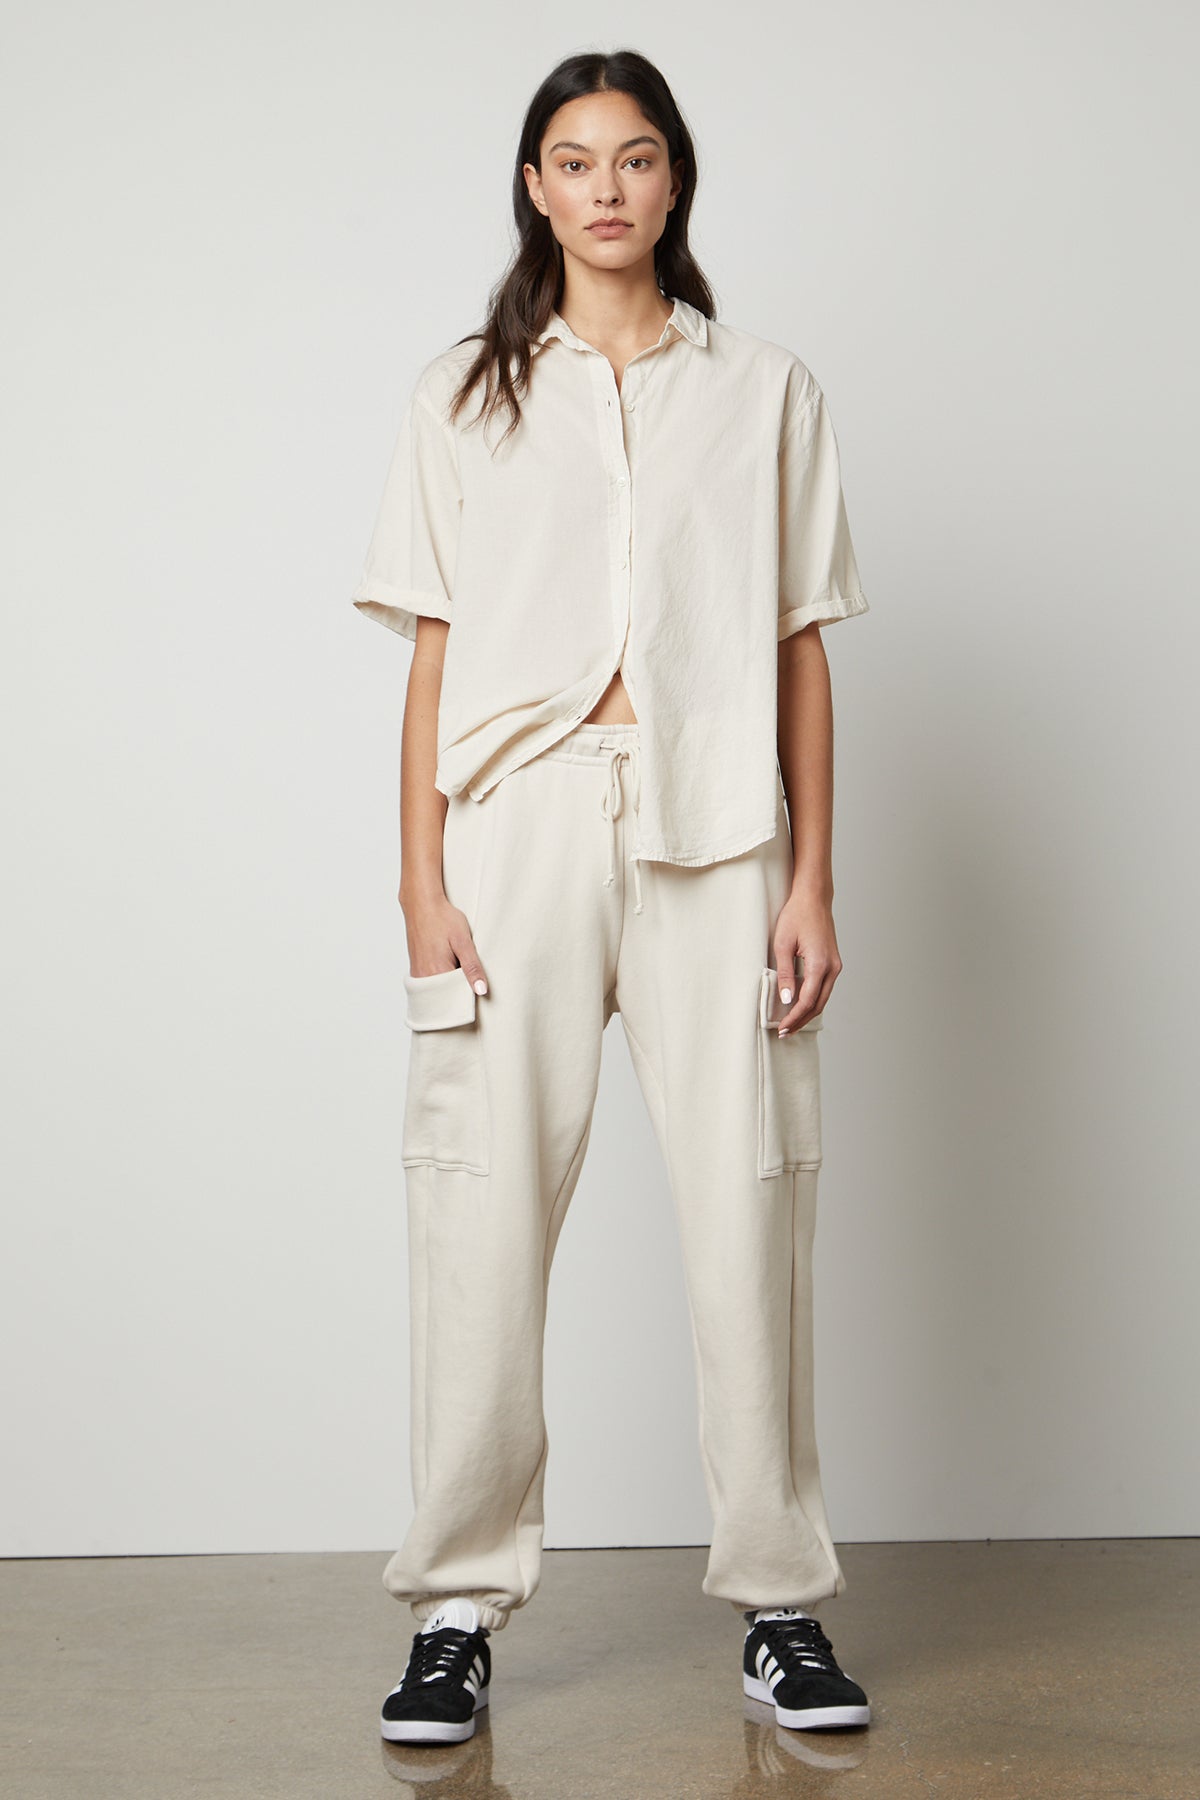 The model is wearing a white sweatshirt and Velvet by Graham & Spencer LUMI DRAWSTRING WAIST SWEATPANT.-35656846213313